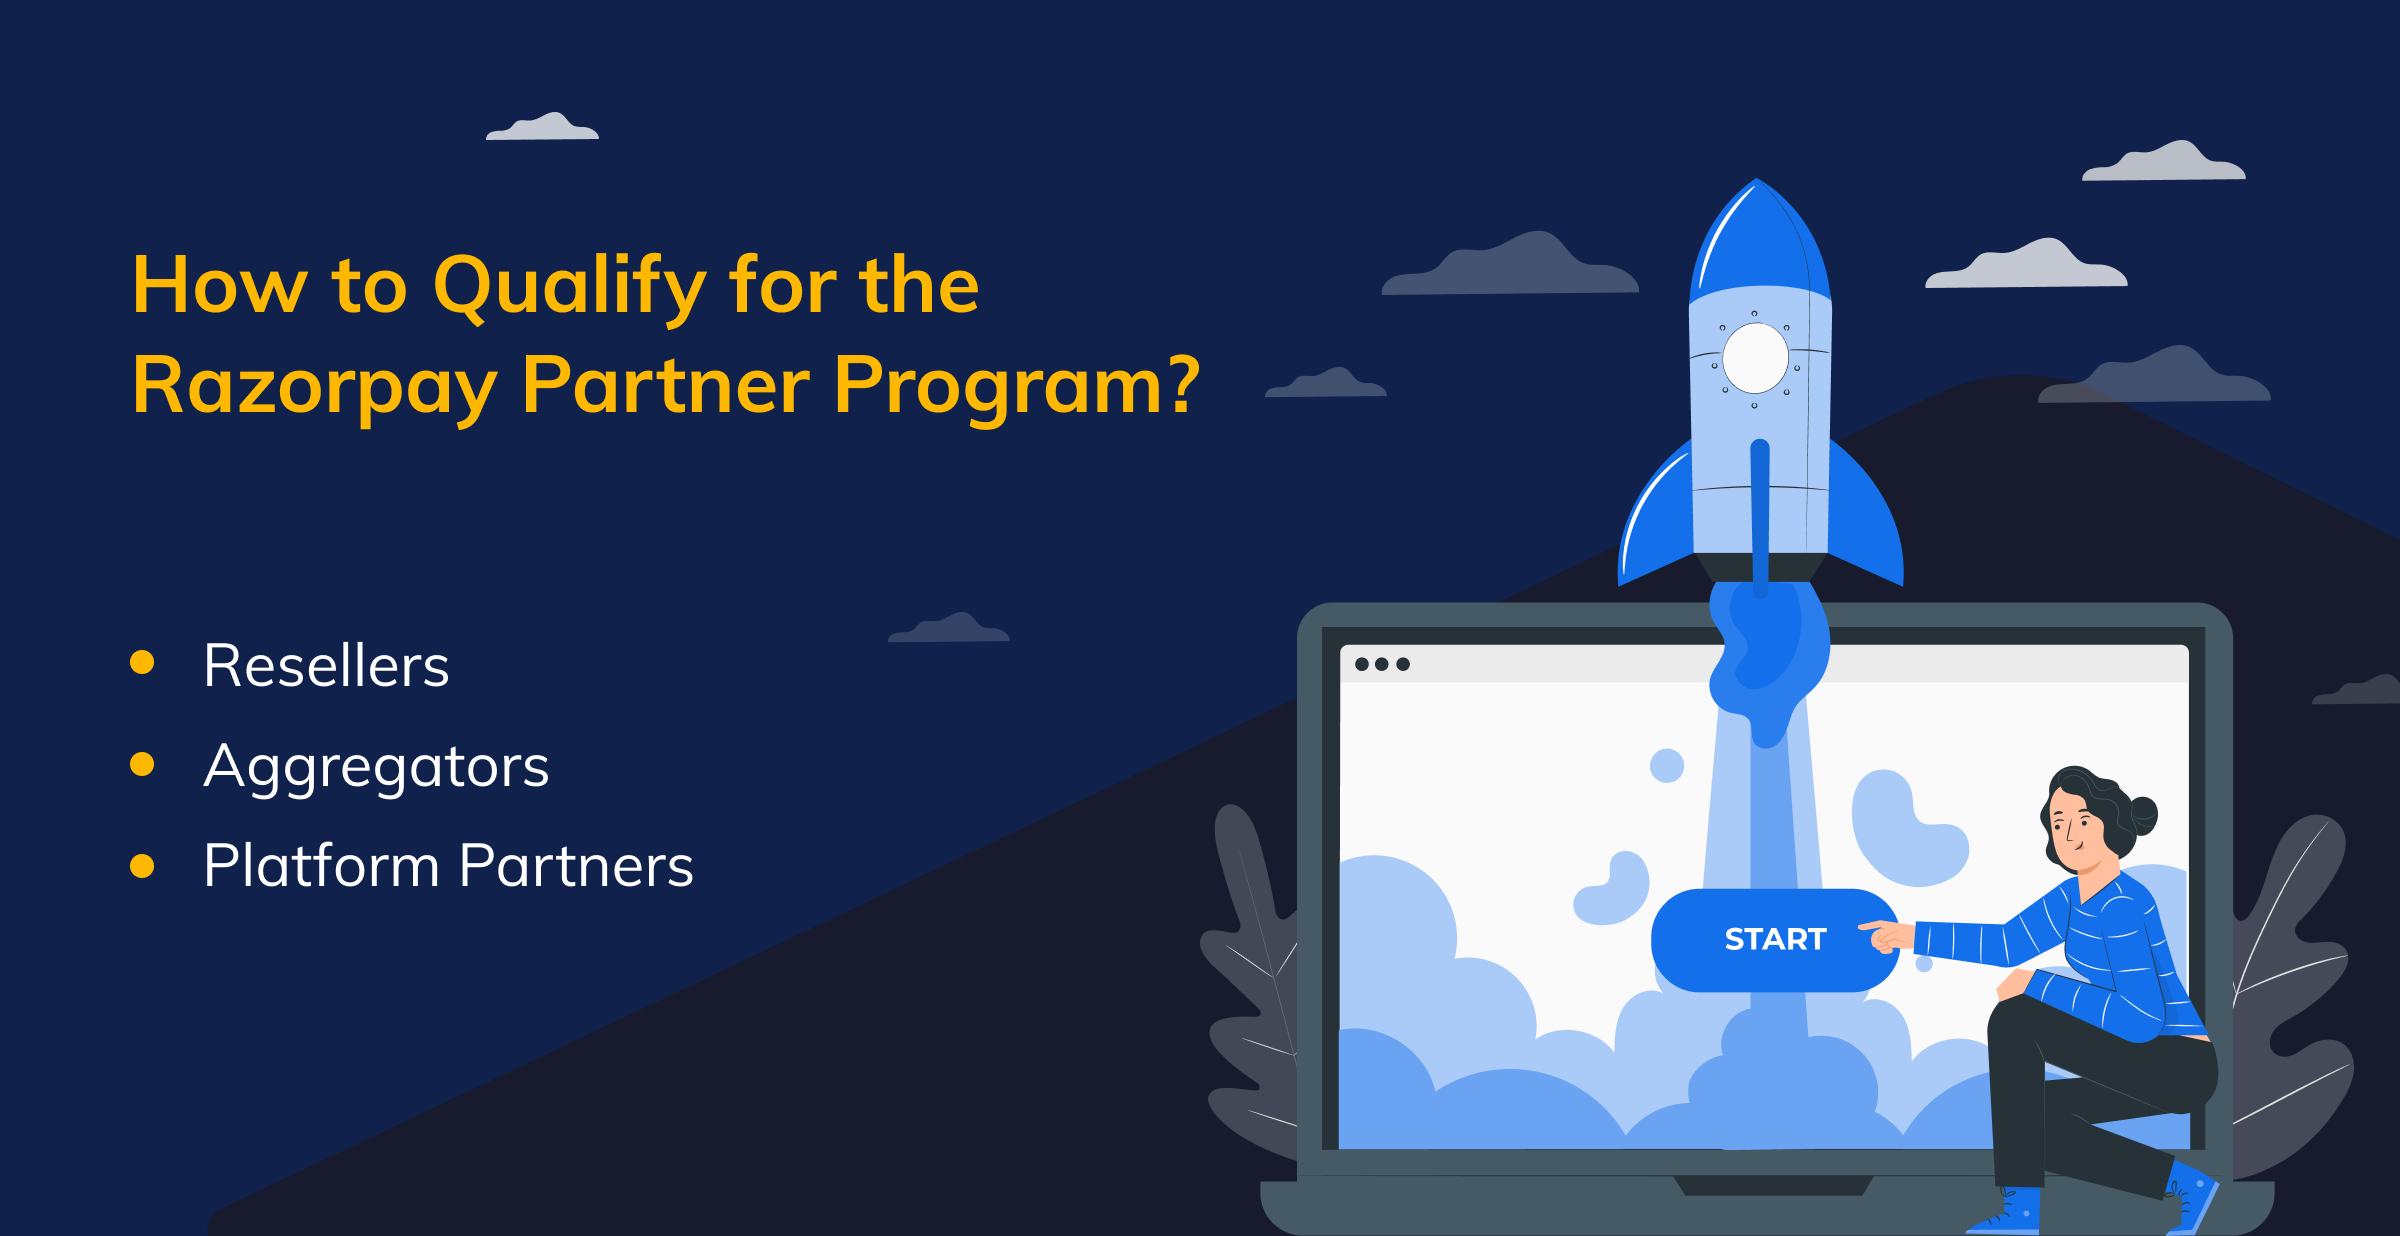 Who can qualify for the Razorpay Partner Program